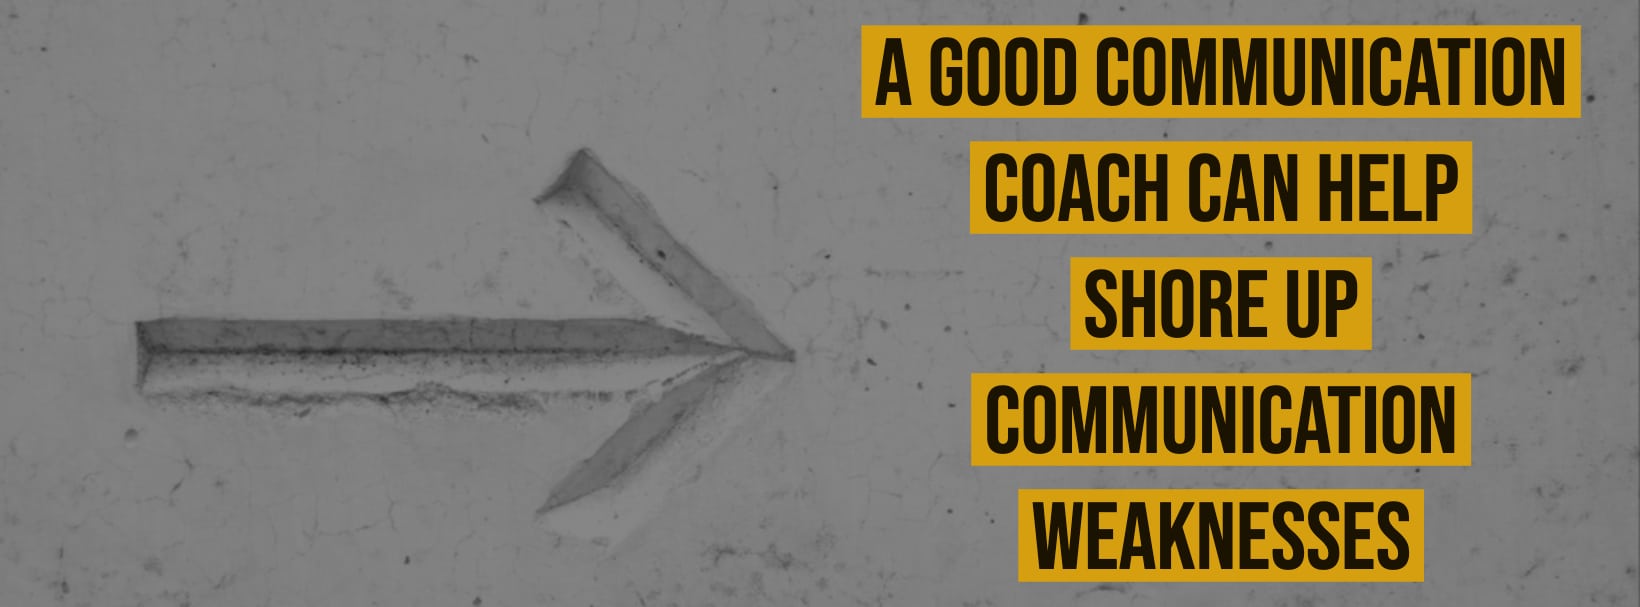 A Good Communication Coach Can Help Shore Up Communication Weaknesses